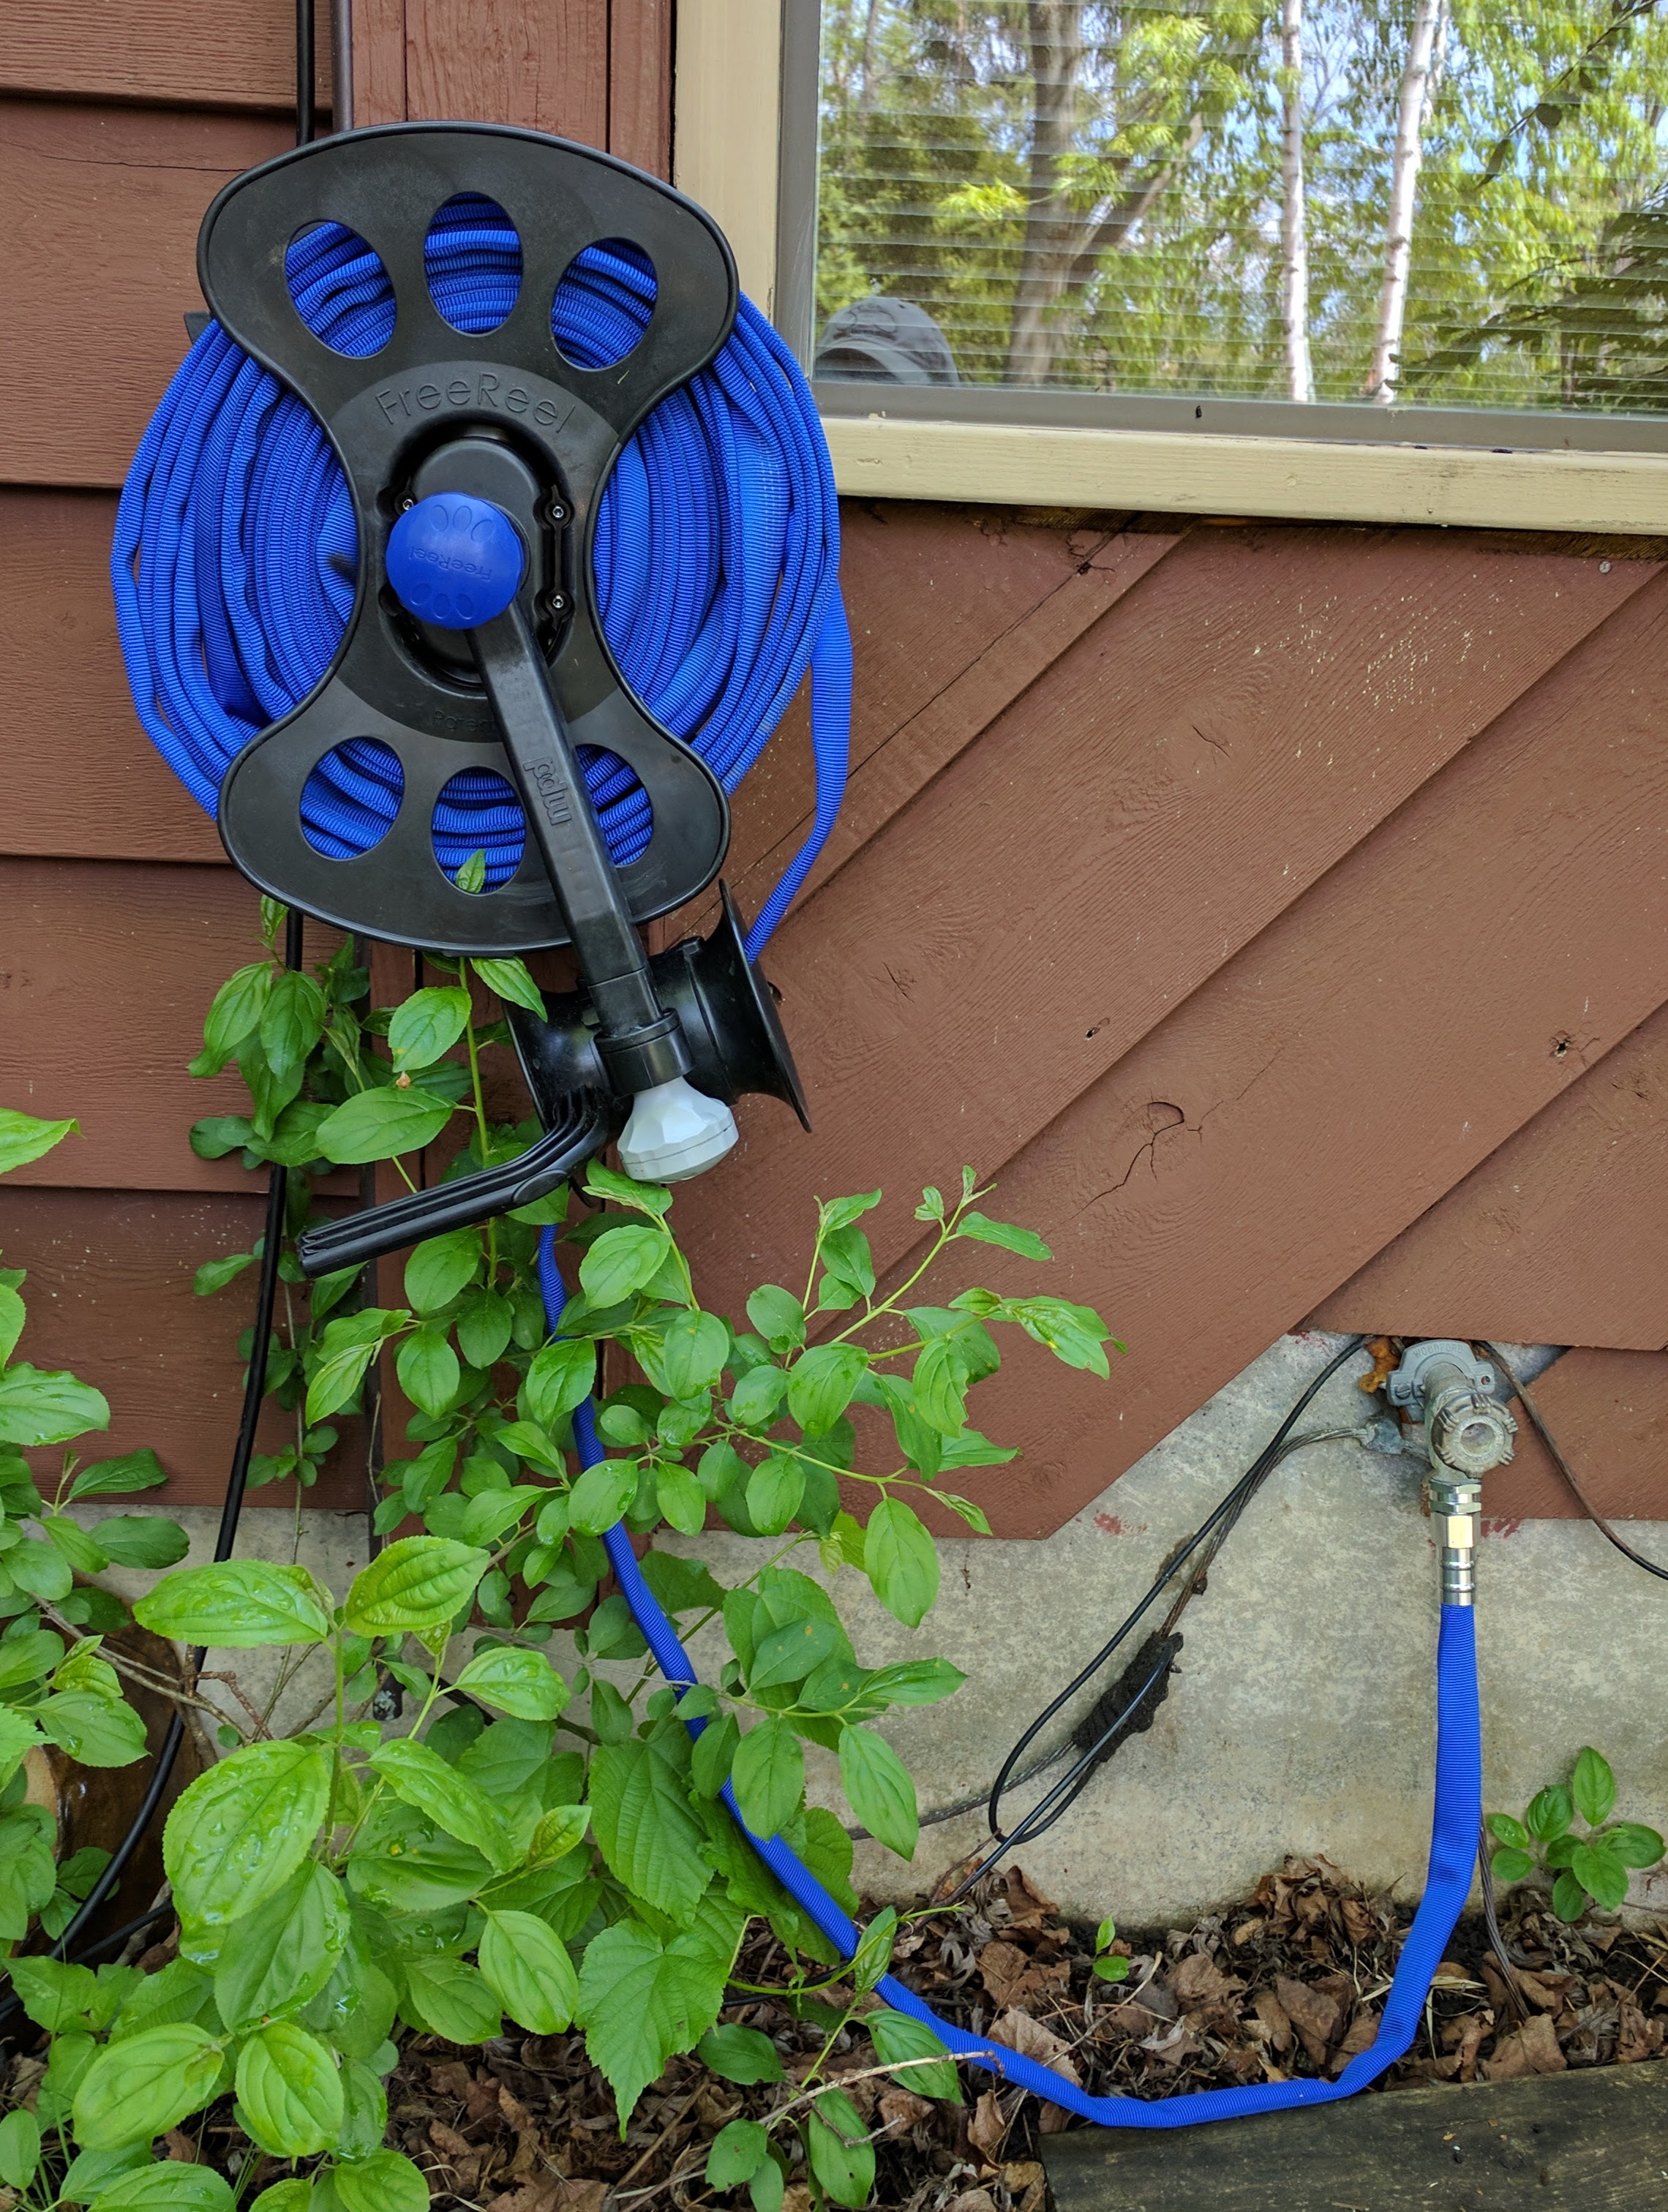 The FreeReel with a Flexible Water Hose